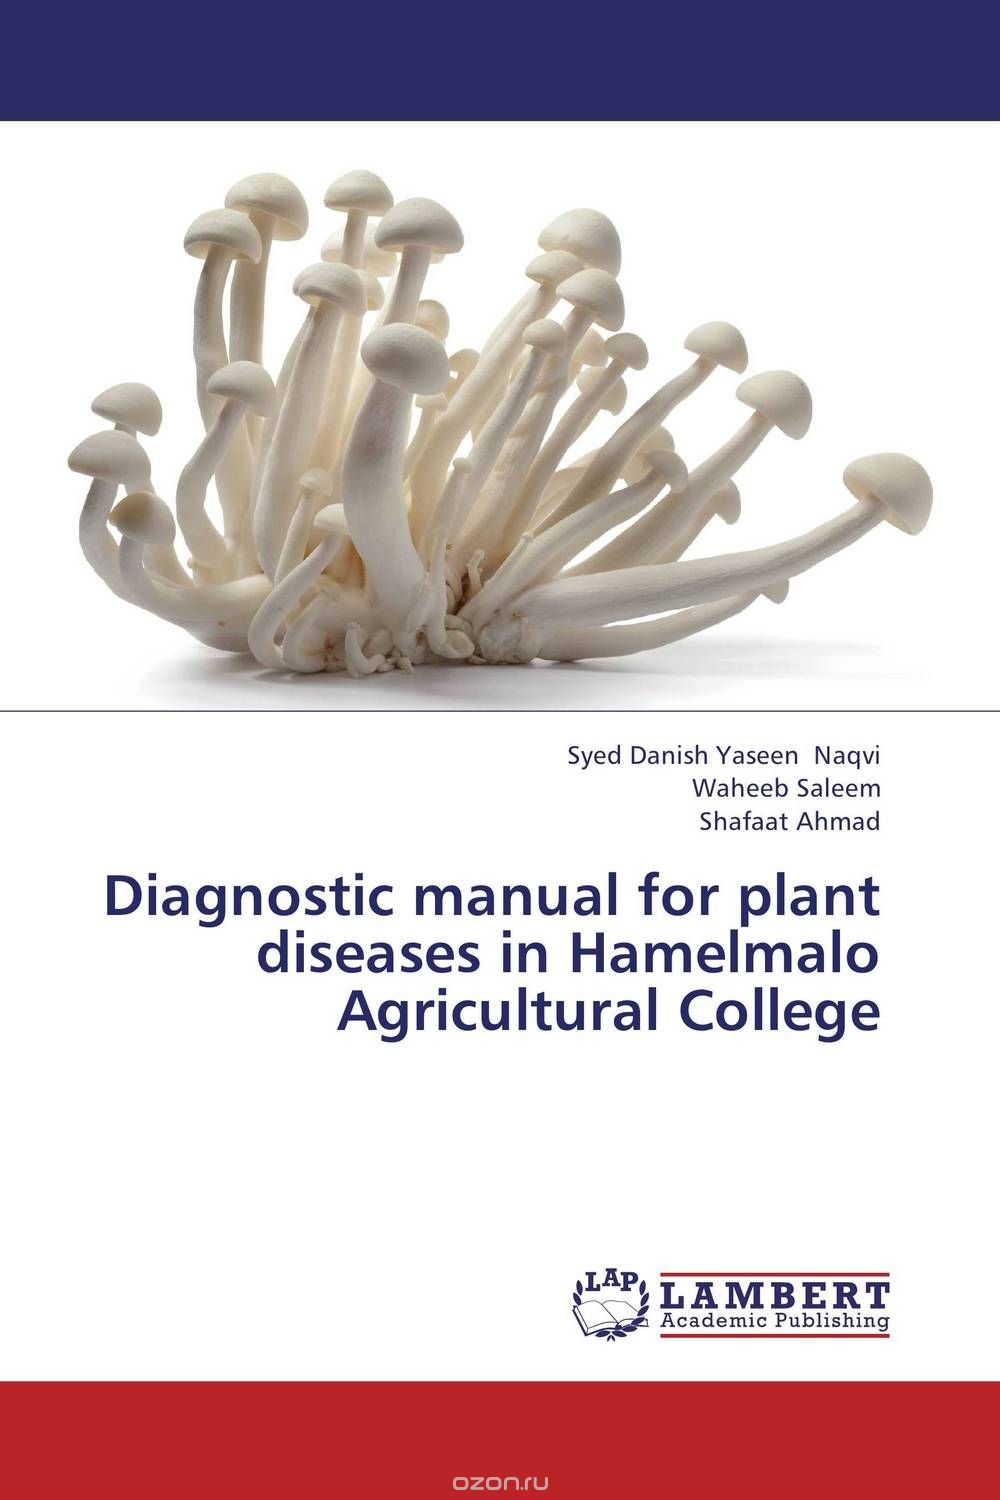 Скачать книгу "Diagnostic manual for plant diseases in Hamelmalo Agricultural College"